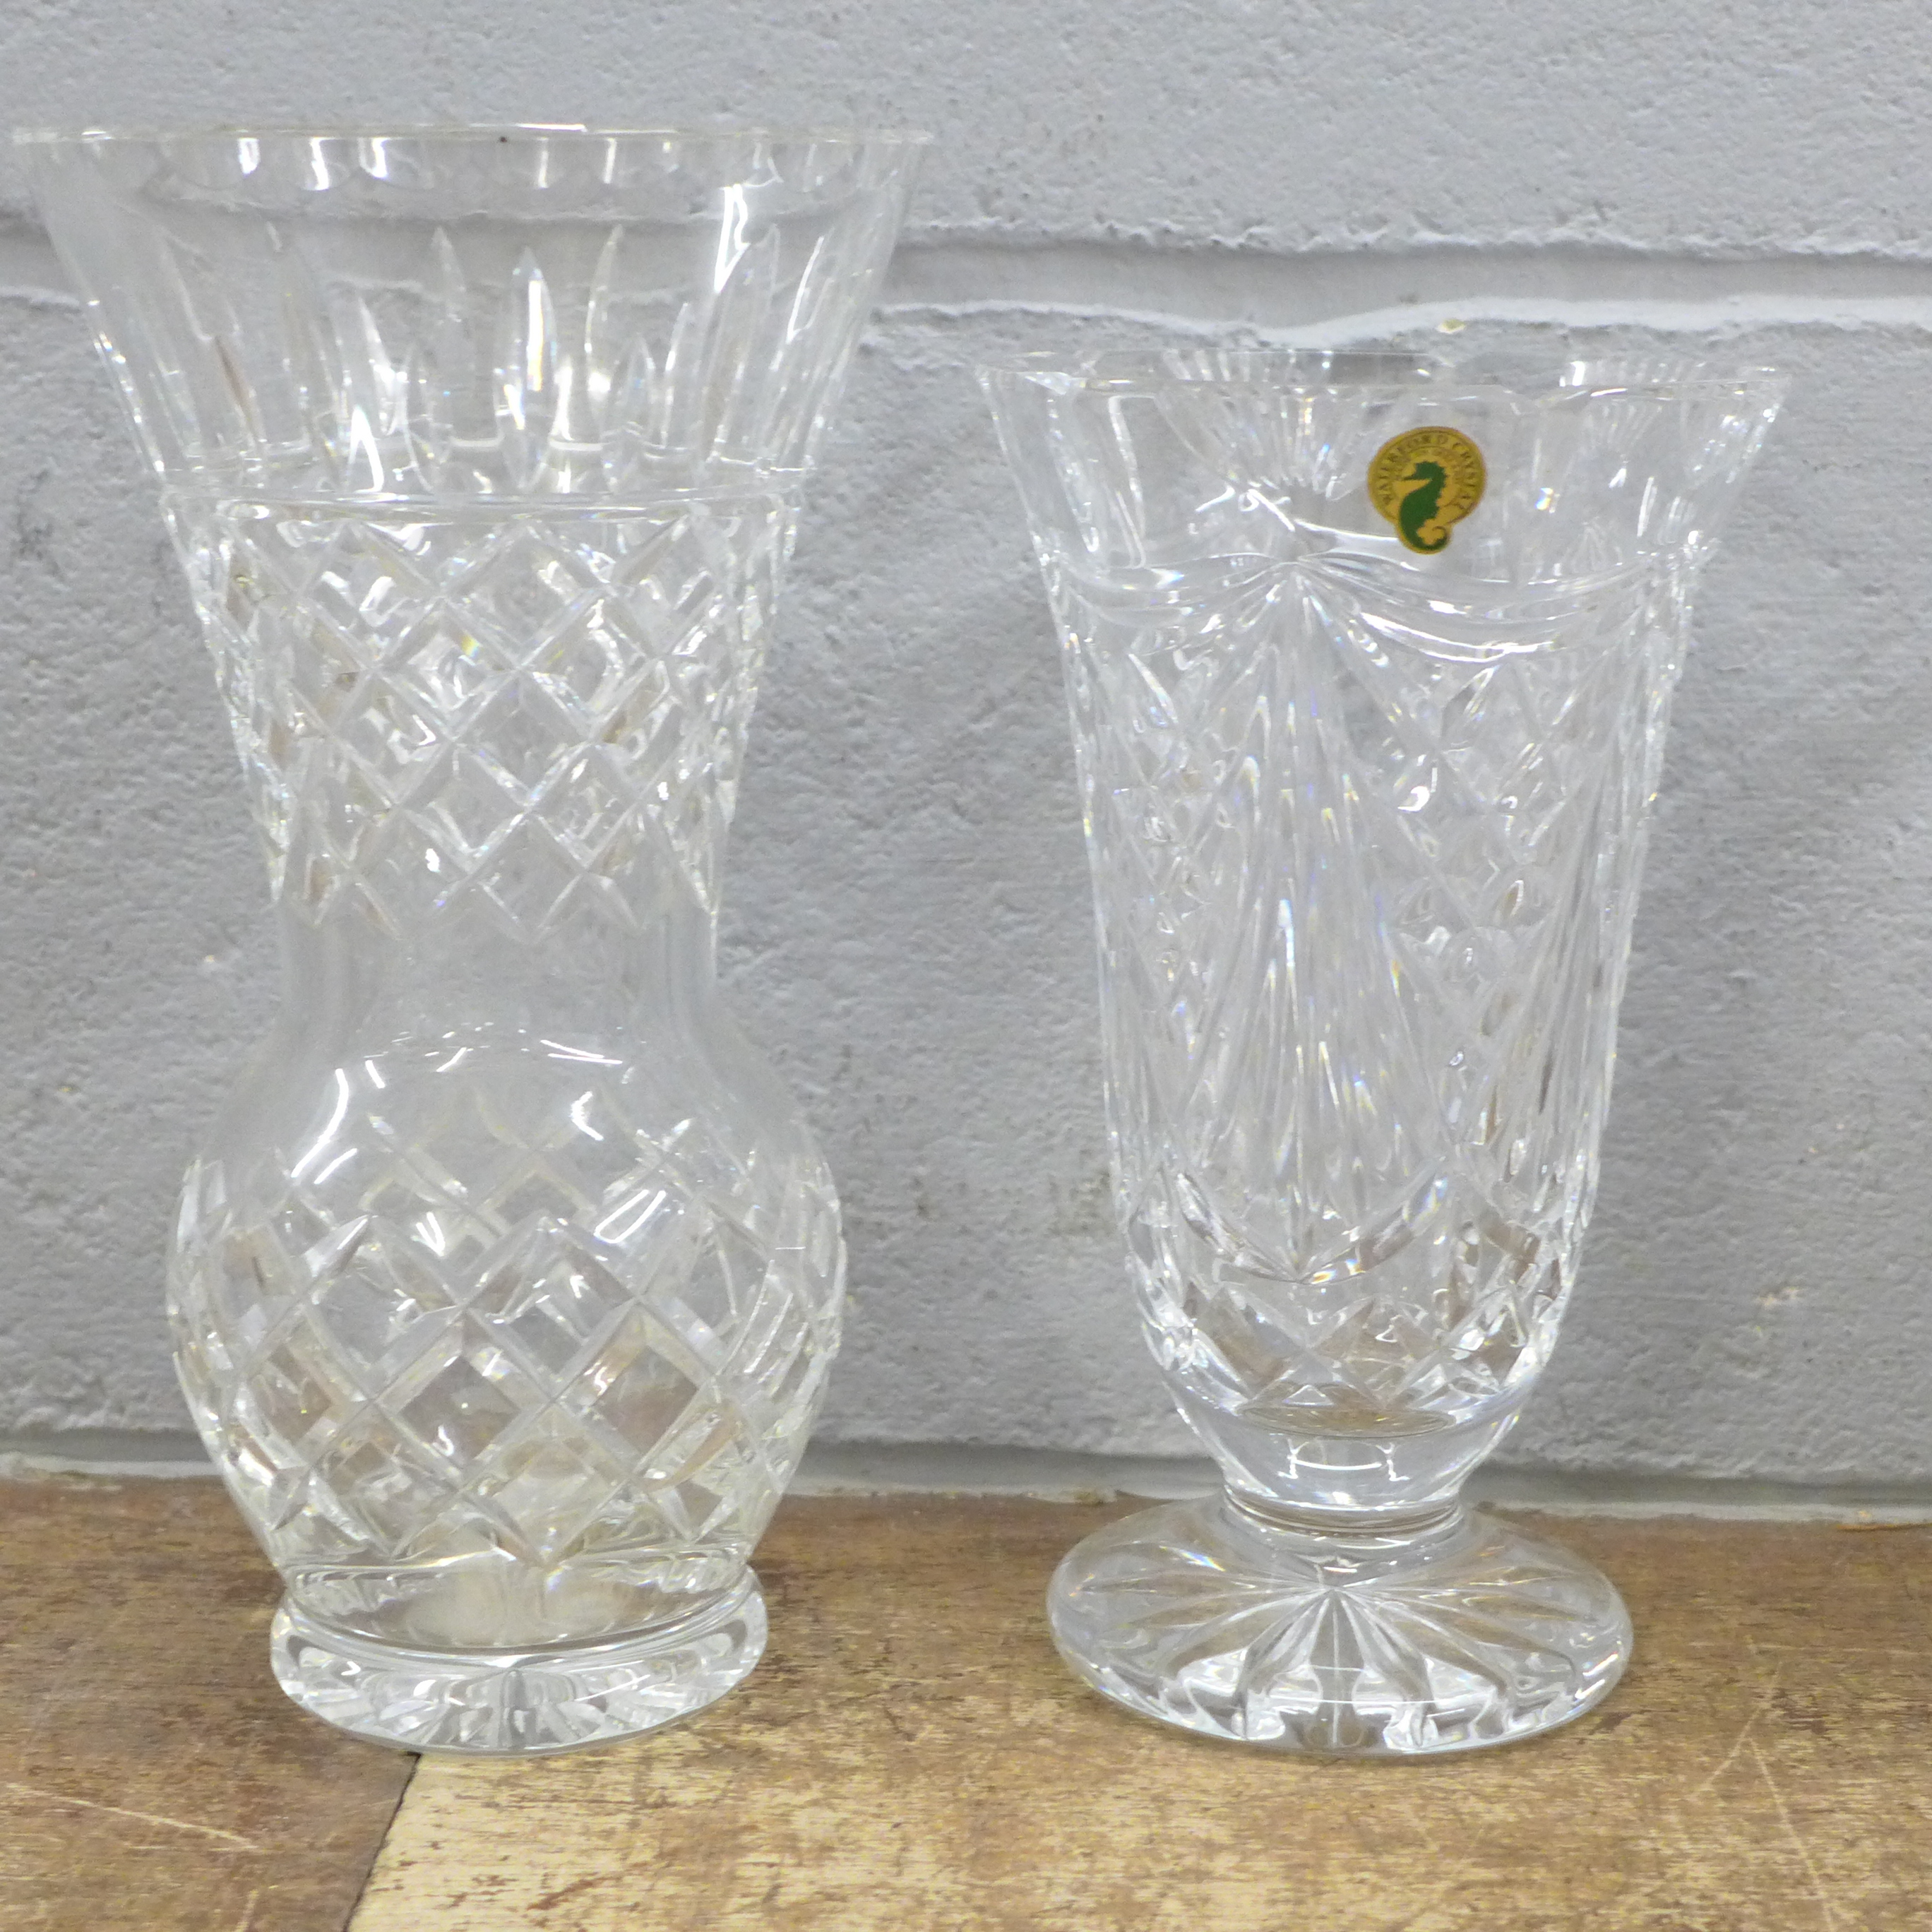 A Waterford Crystal clock, two Waterford Crystal vases, two Bohemia crystal posy vases and two other - Image 4 of 4